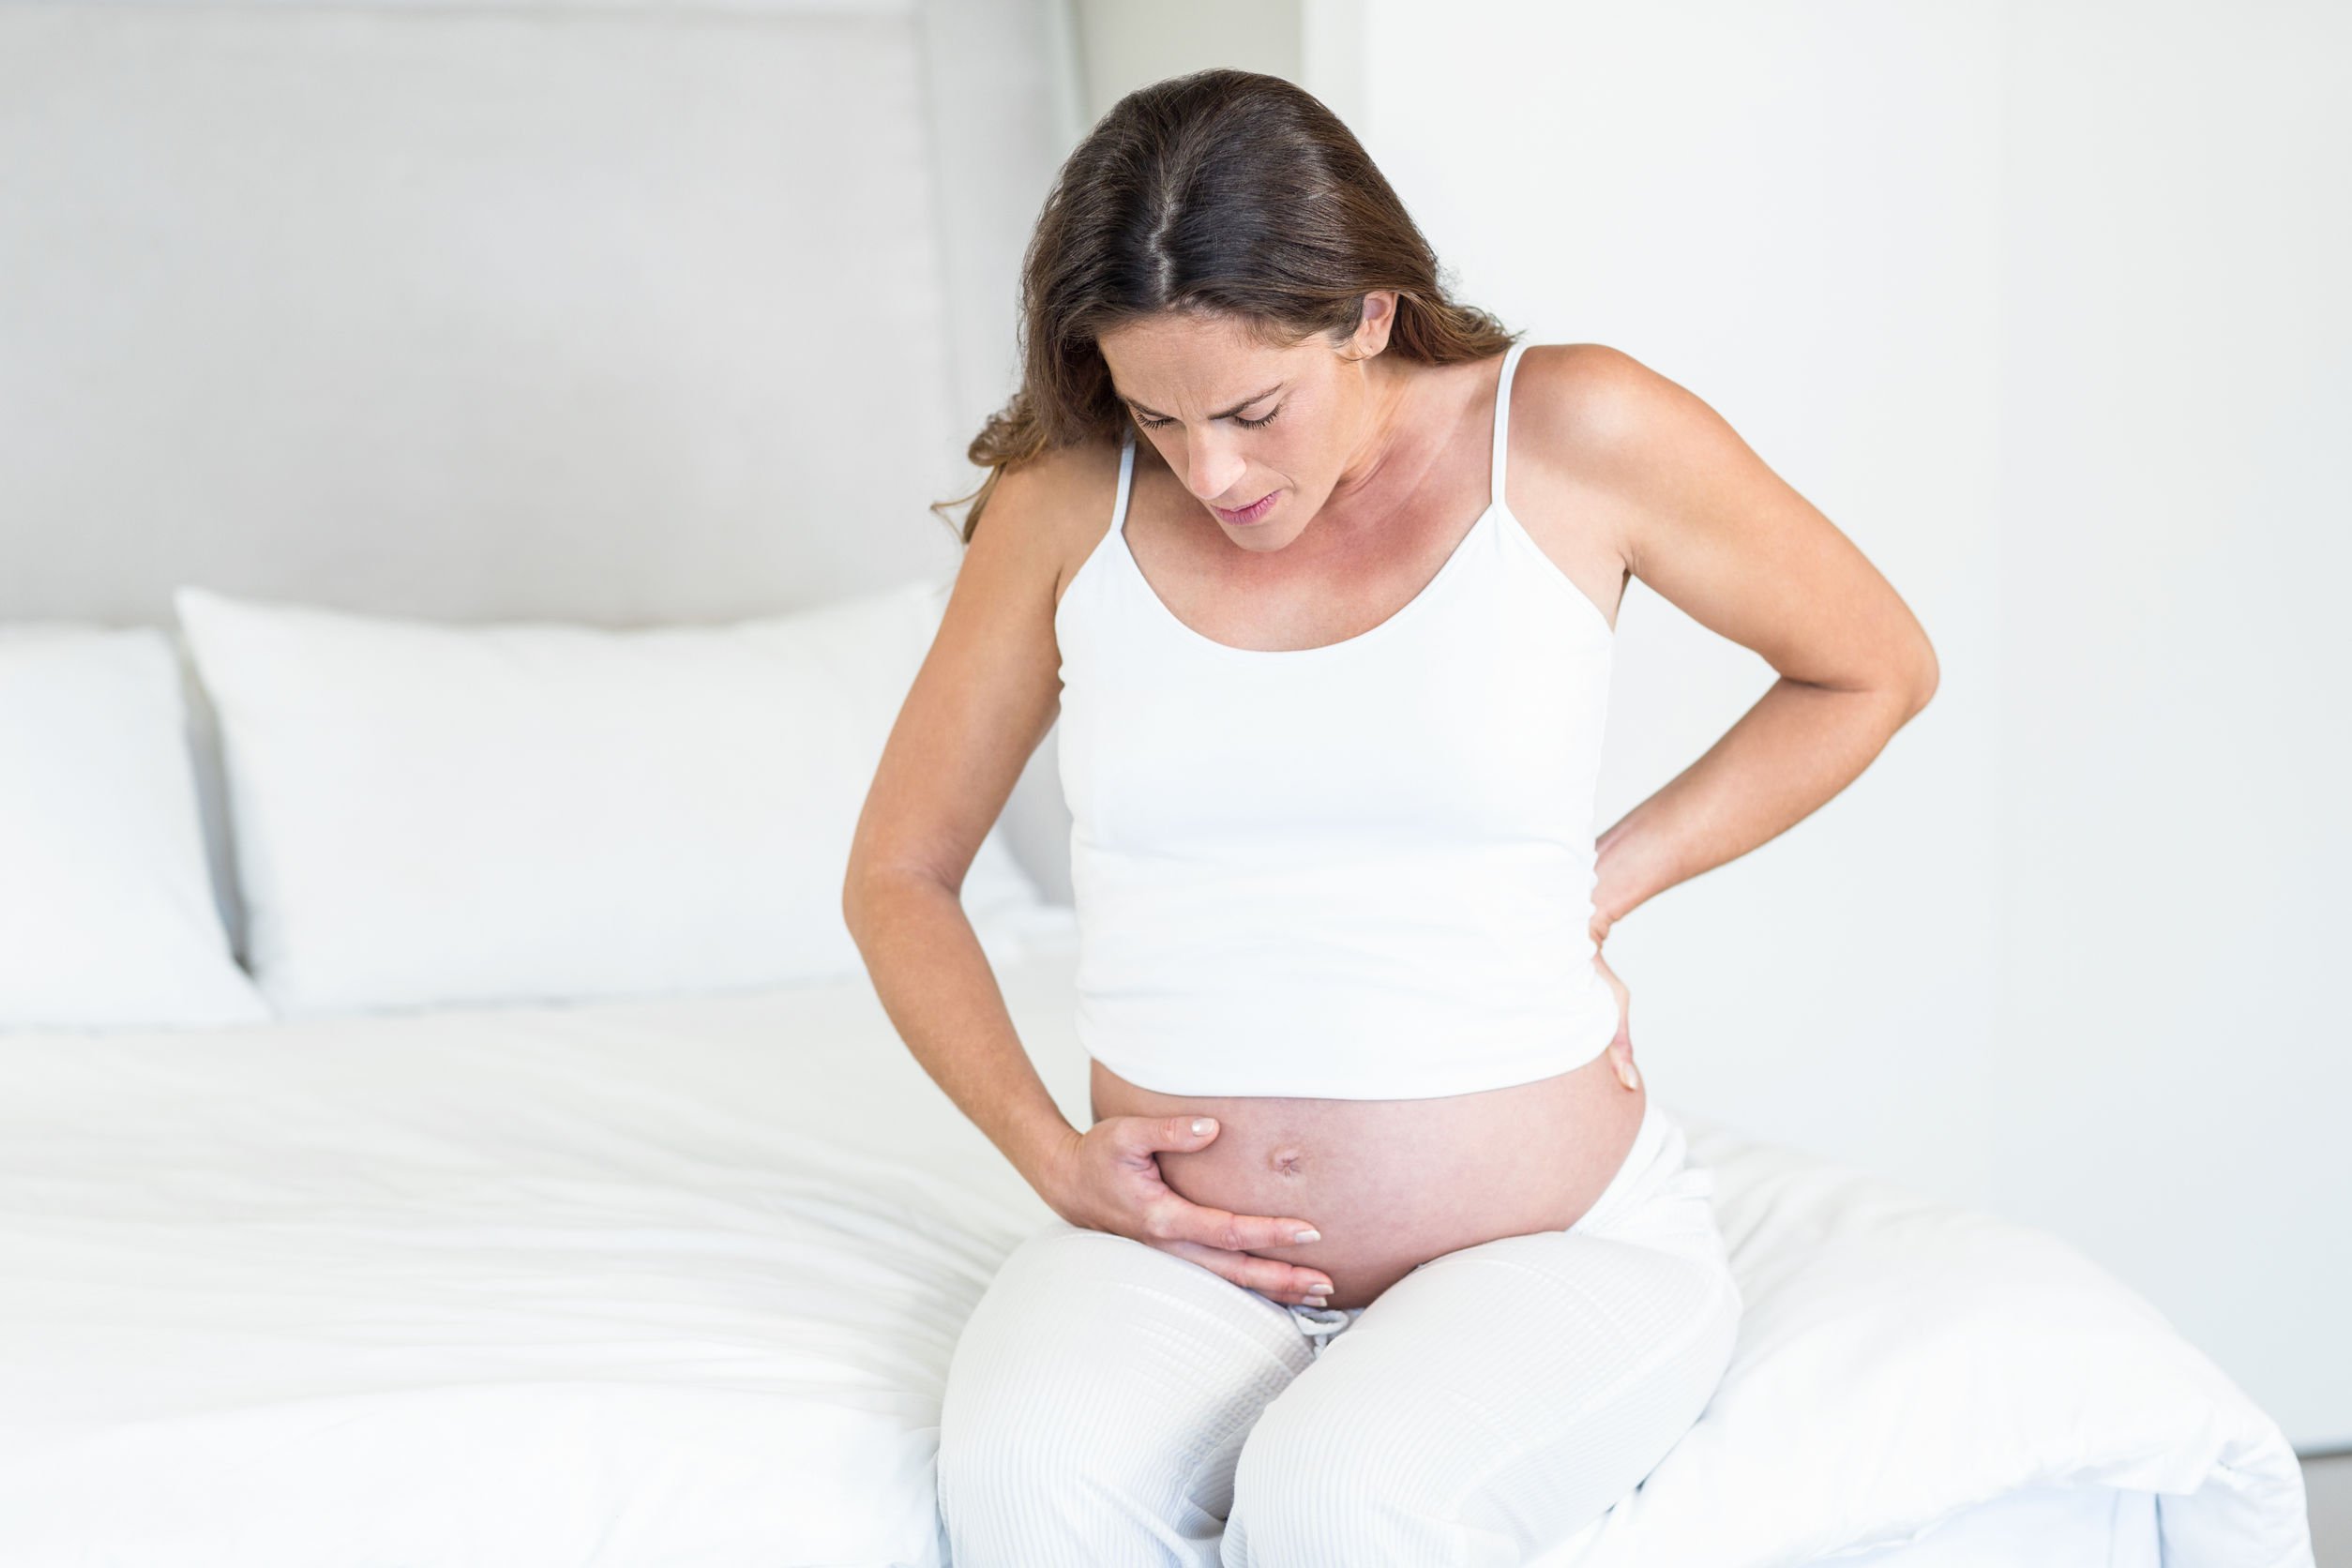 Pregnancy and Low Back Pain